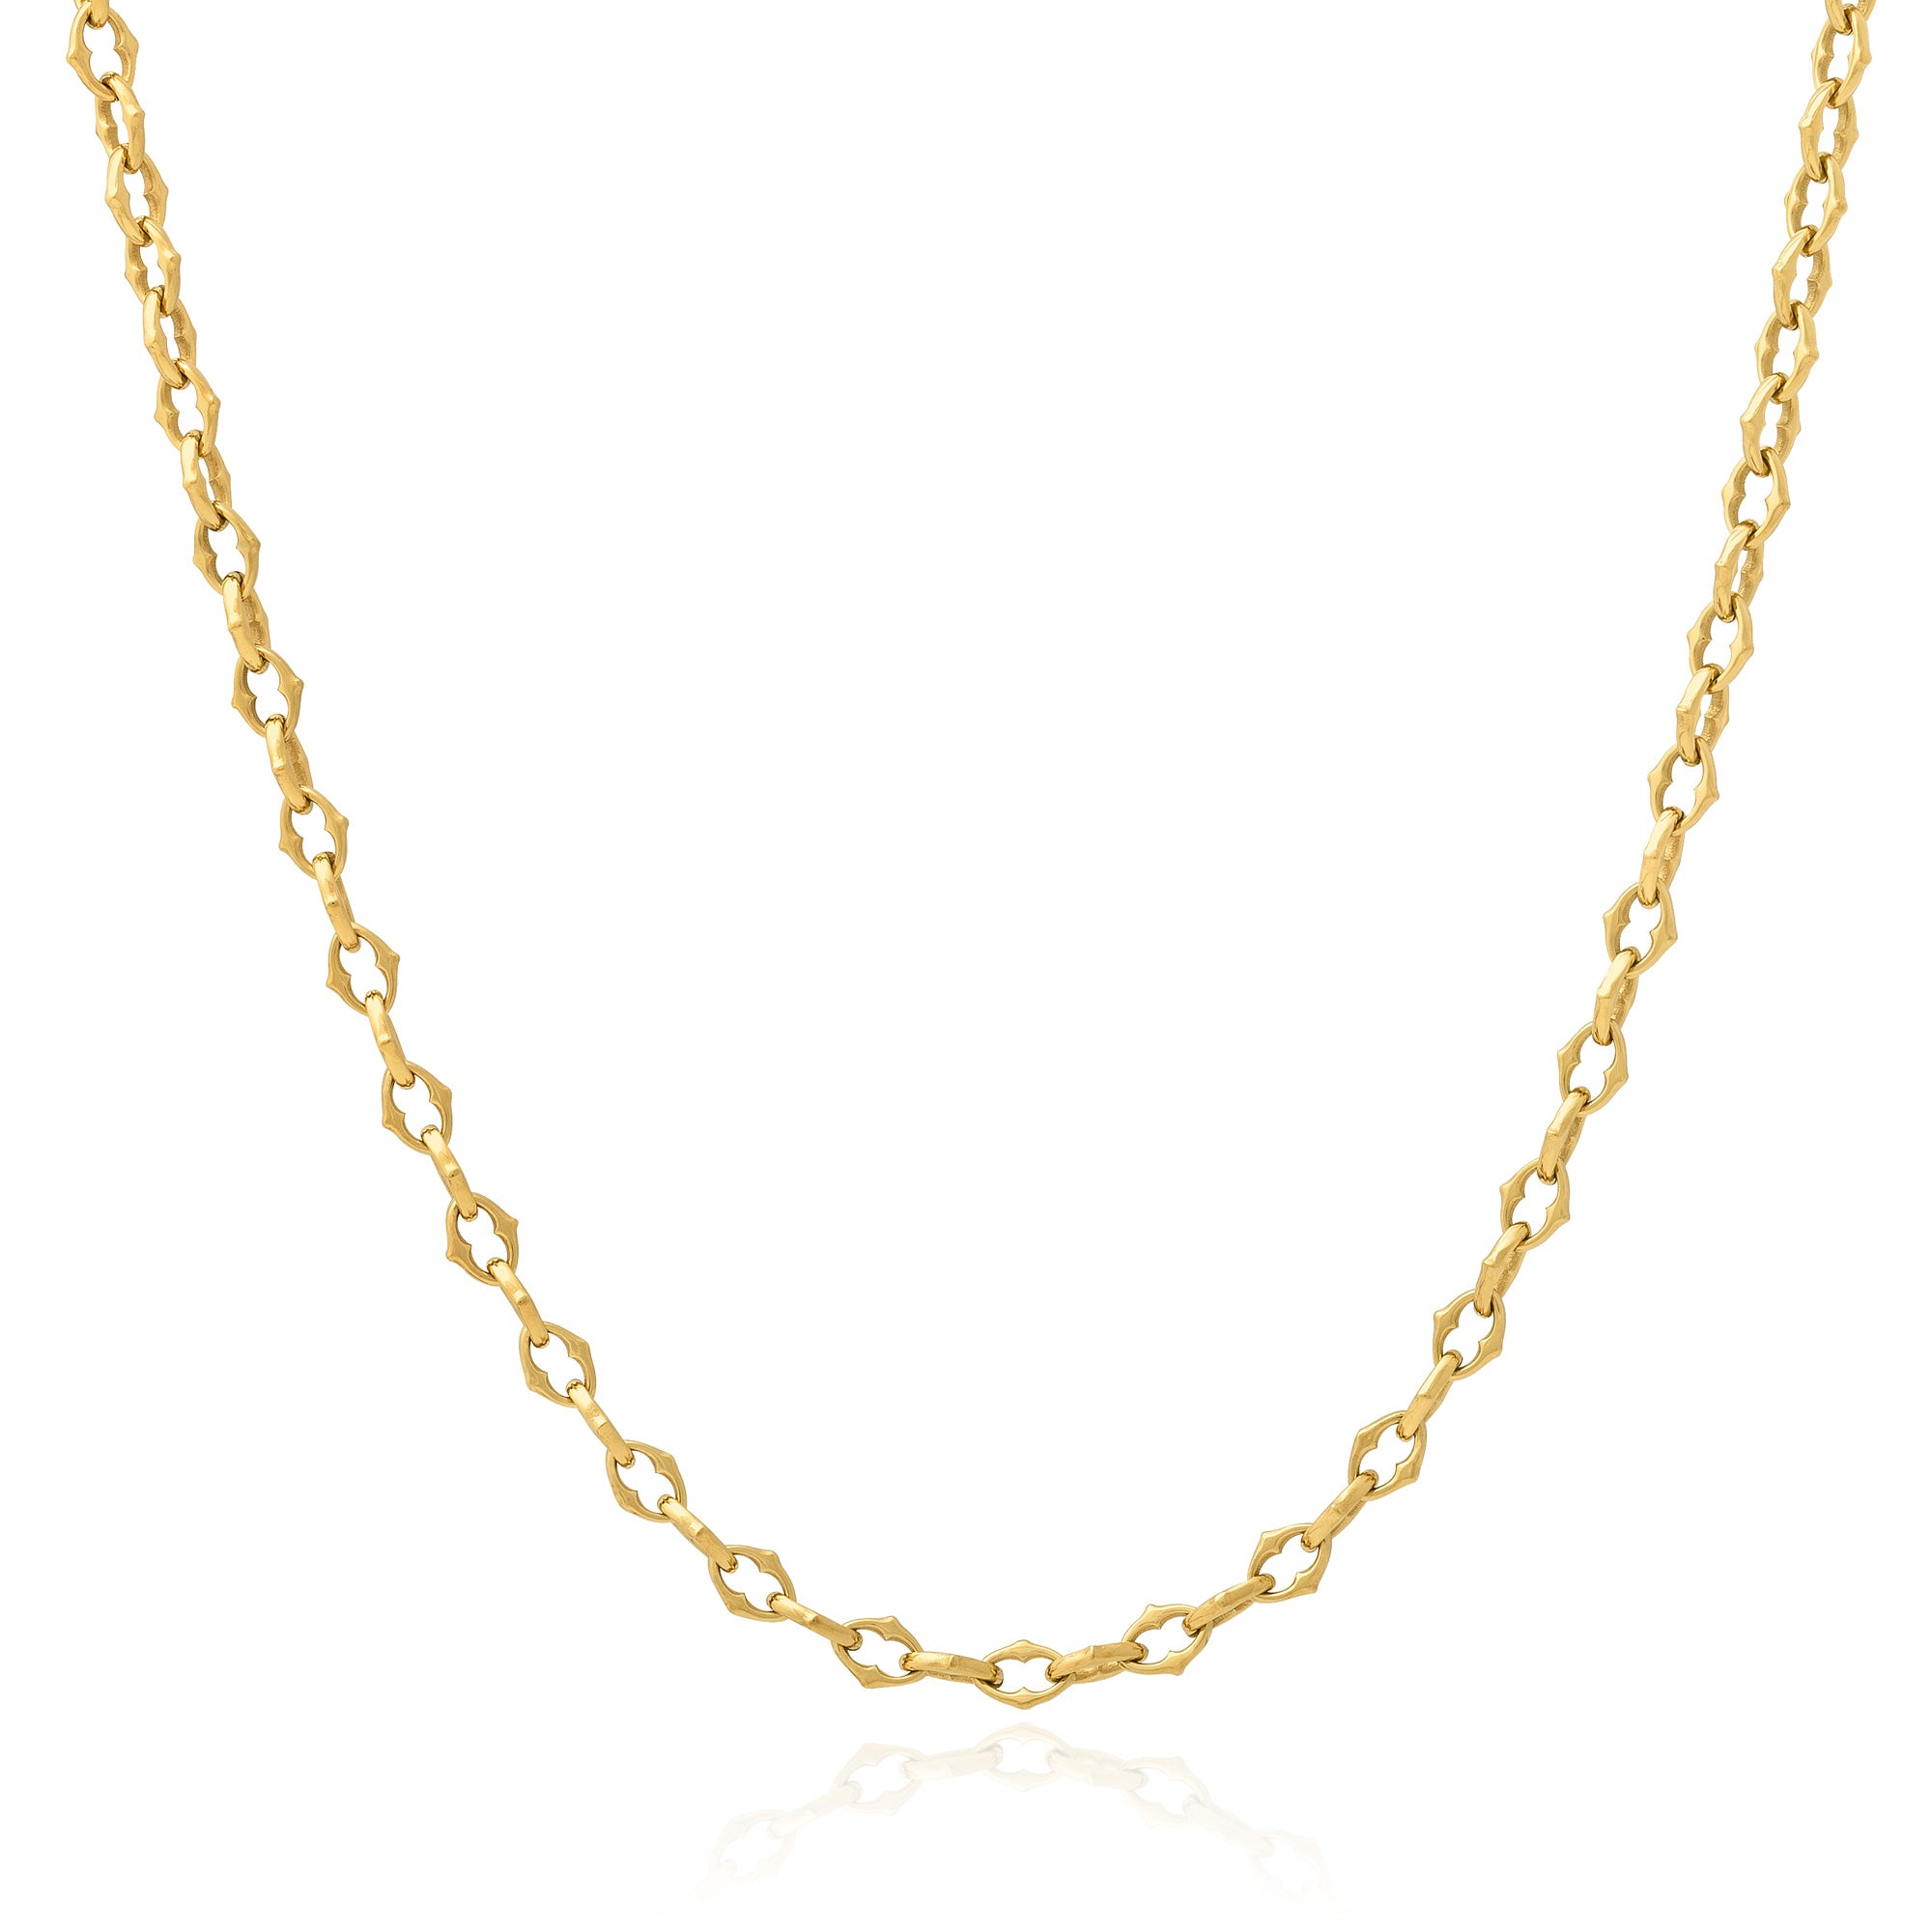 Gold spiked Link necklace on white